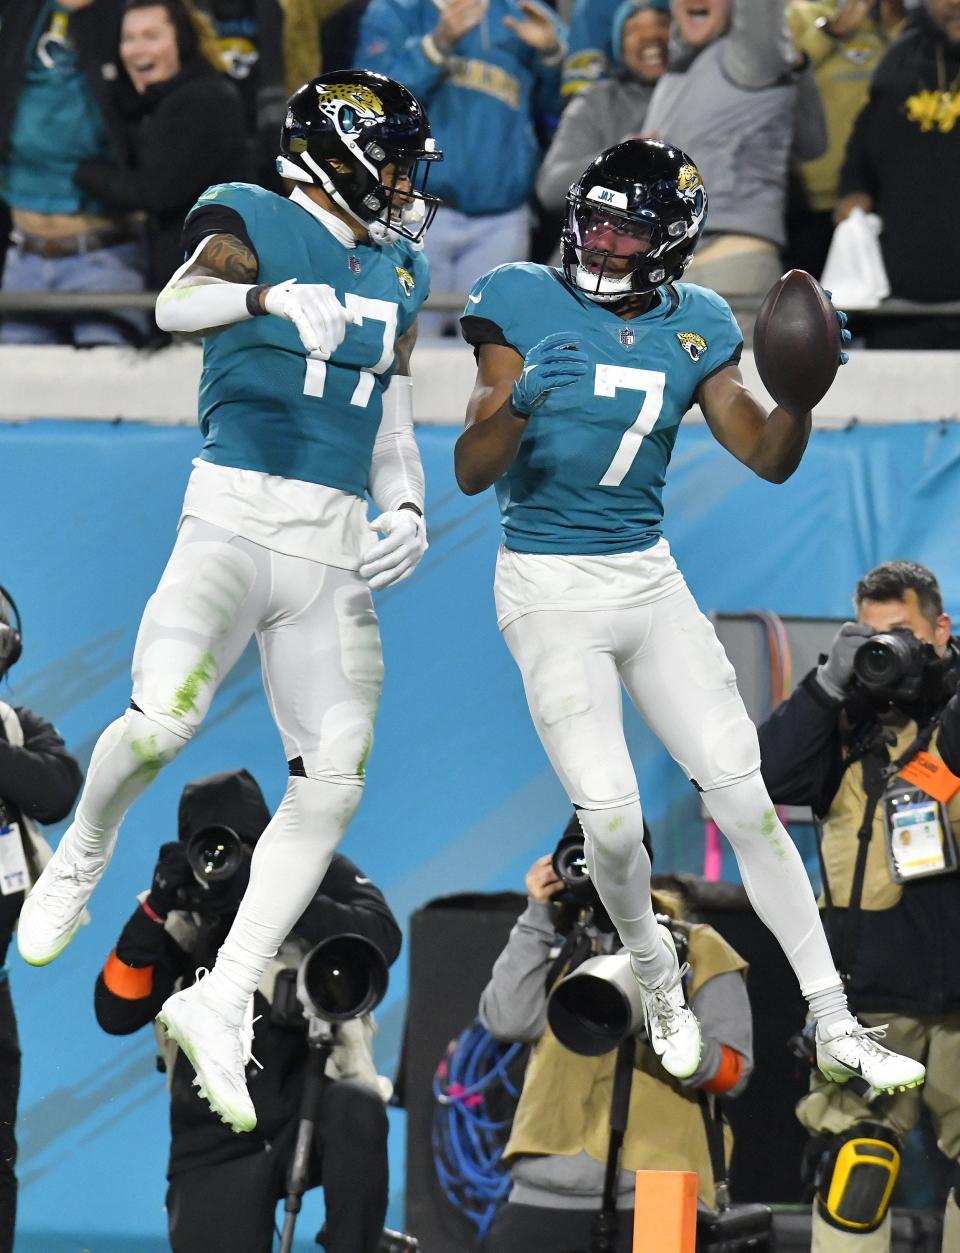 Jacksonville Jaguars tight end Evan Engram (17) celebrates with teammate wide receiver Zay Jones (7) after Jones' late third quarter touchdown. The Jacksonville Jaguars hosted the Los Angeles Chargers in their first round playoff game Saturday, January 14, 2023 at TIAA Bank Field in Jacksonville, Fla. The Jaguars trailed 27 to 7 at the half but came back to win the game 31 to 30. [Bob Self/Florida Times-Union]